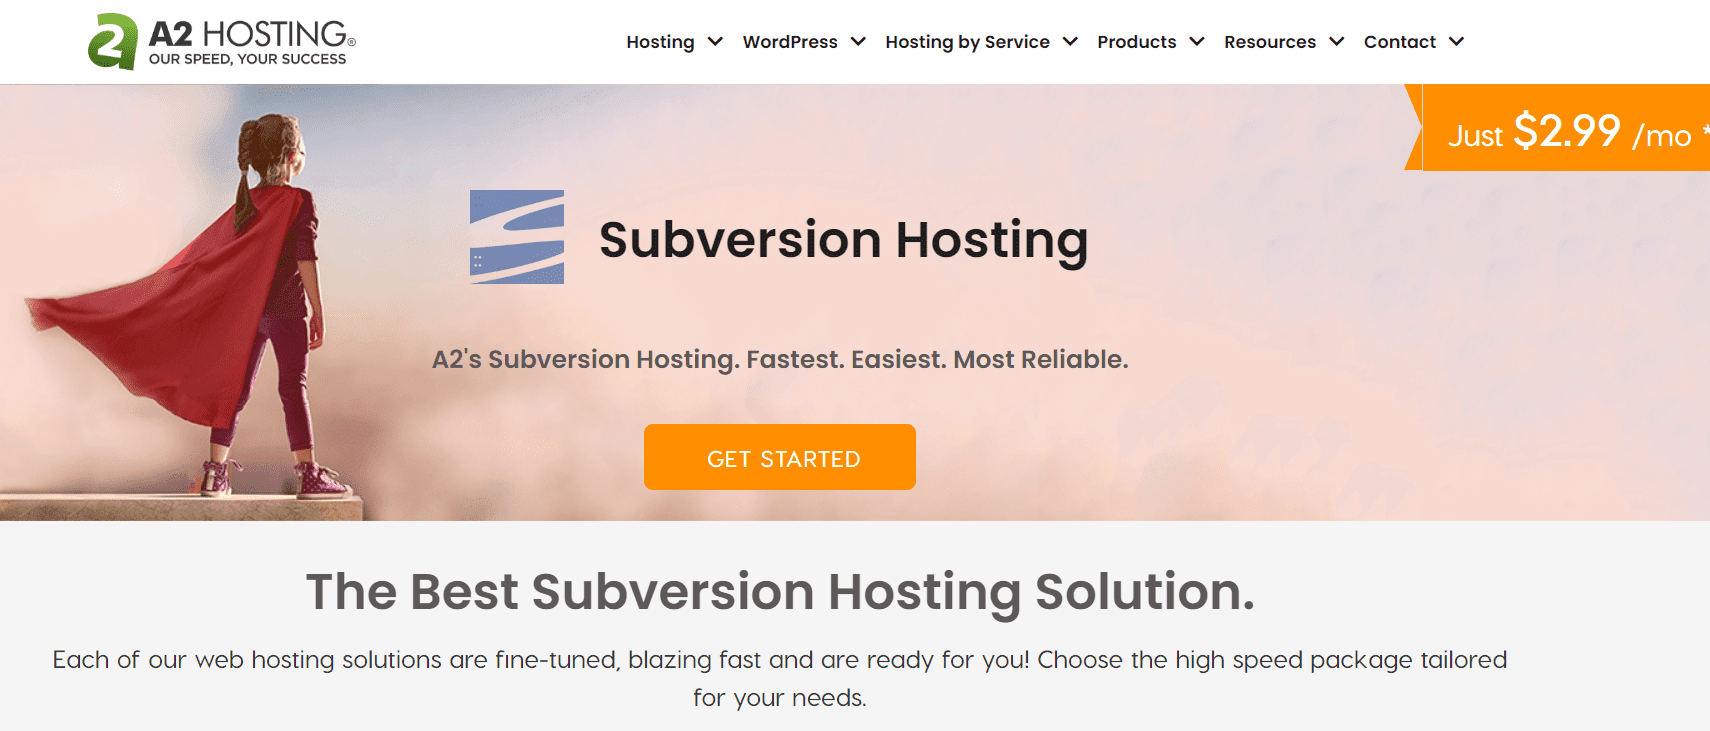 A2 Hosting Landing Page